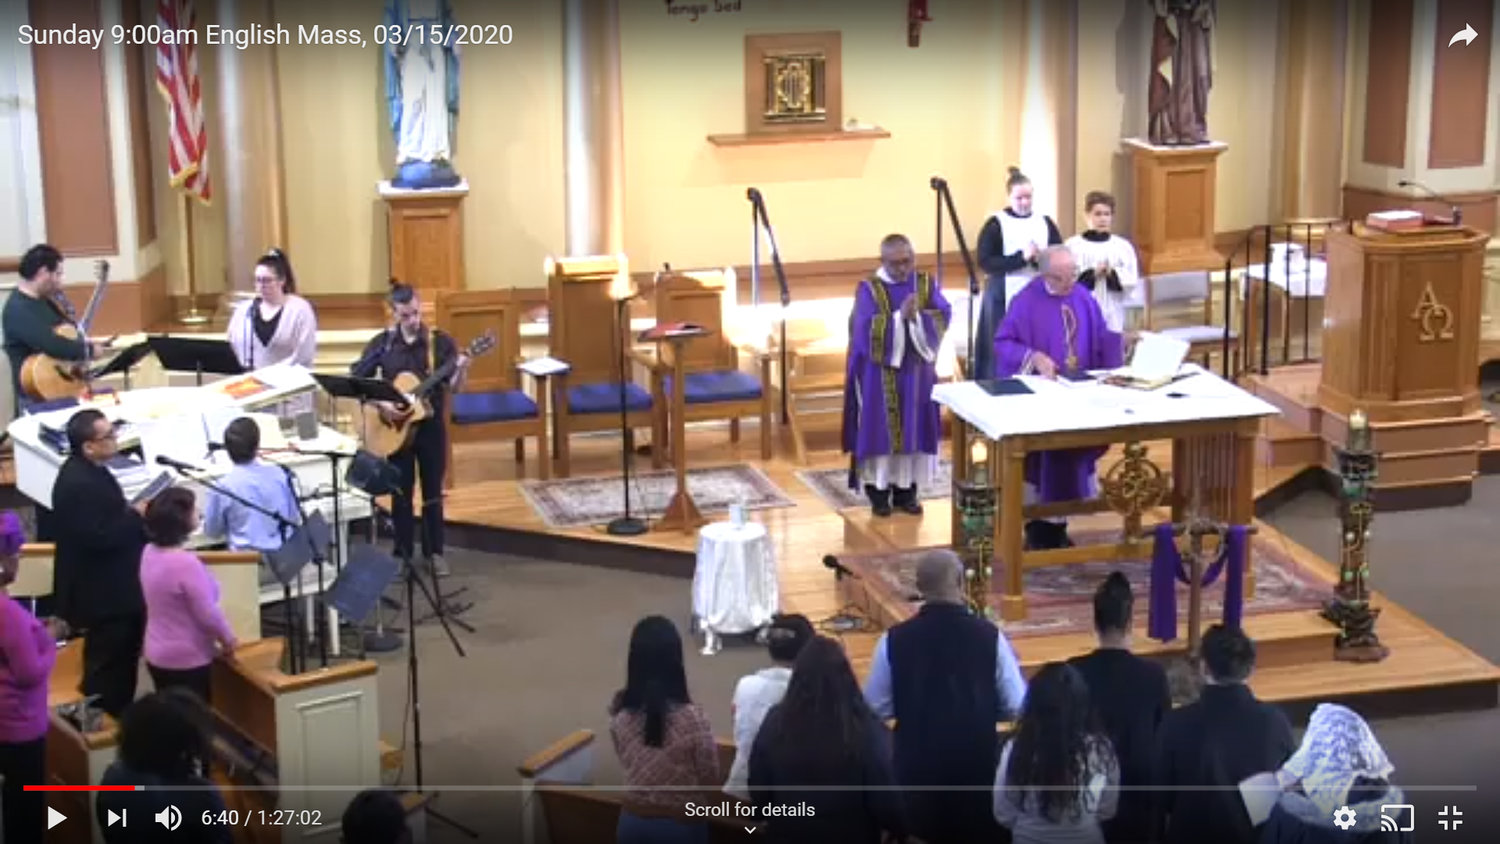 Many parishes throughout the Diocese of Providence are offering live streaming Masses in the wake of the coronavirus pandemic, following Bishop Thomas J. Tobin’s directive that all public Masses be suspended in the Diocese of Providence until further notice. Pictured are screenshots from LIVE Masses this past weekend: Father Nicholas Smith at St. Patrick Church, Providence.